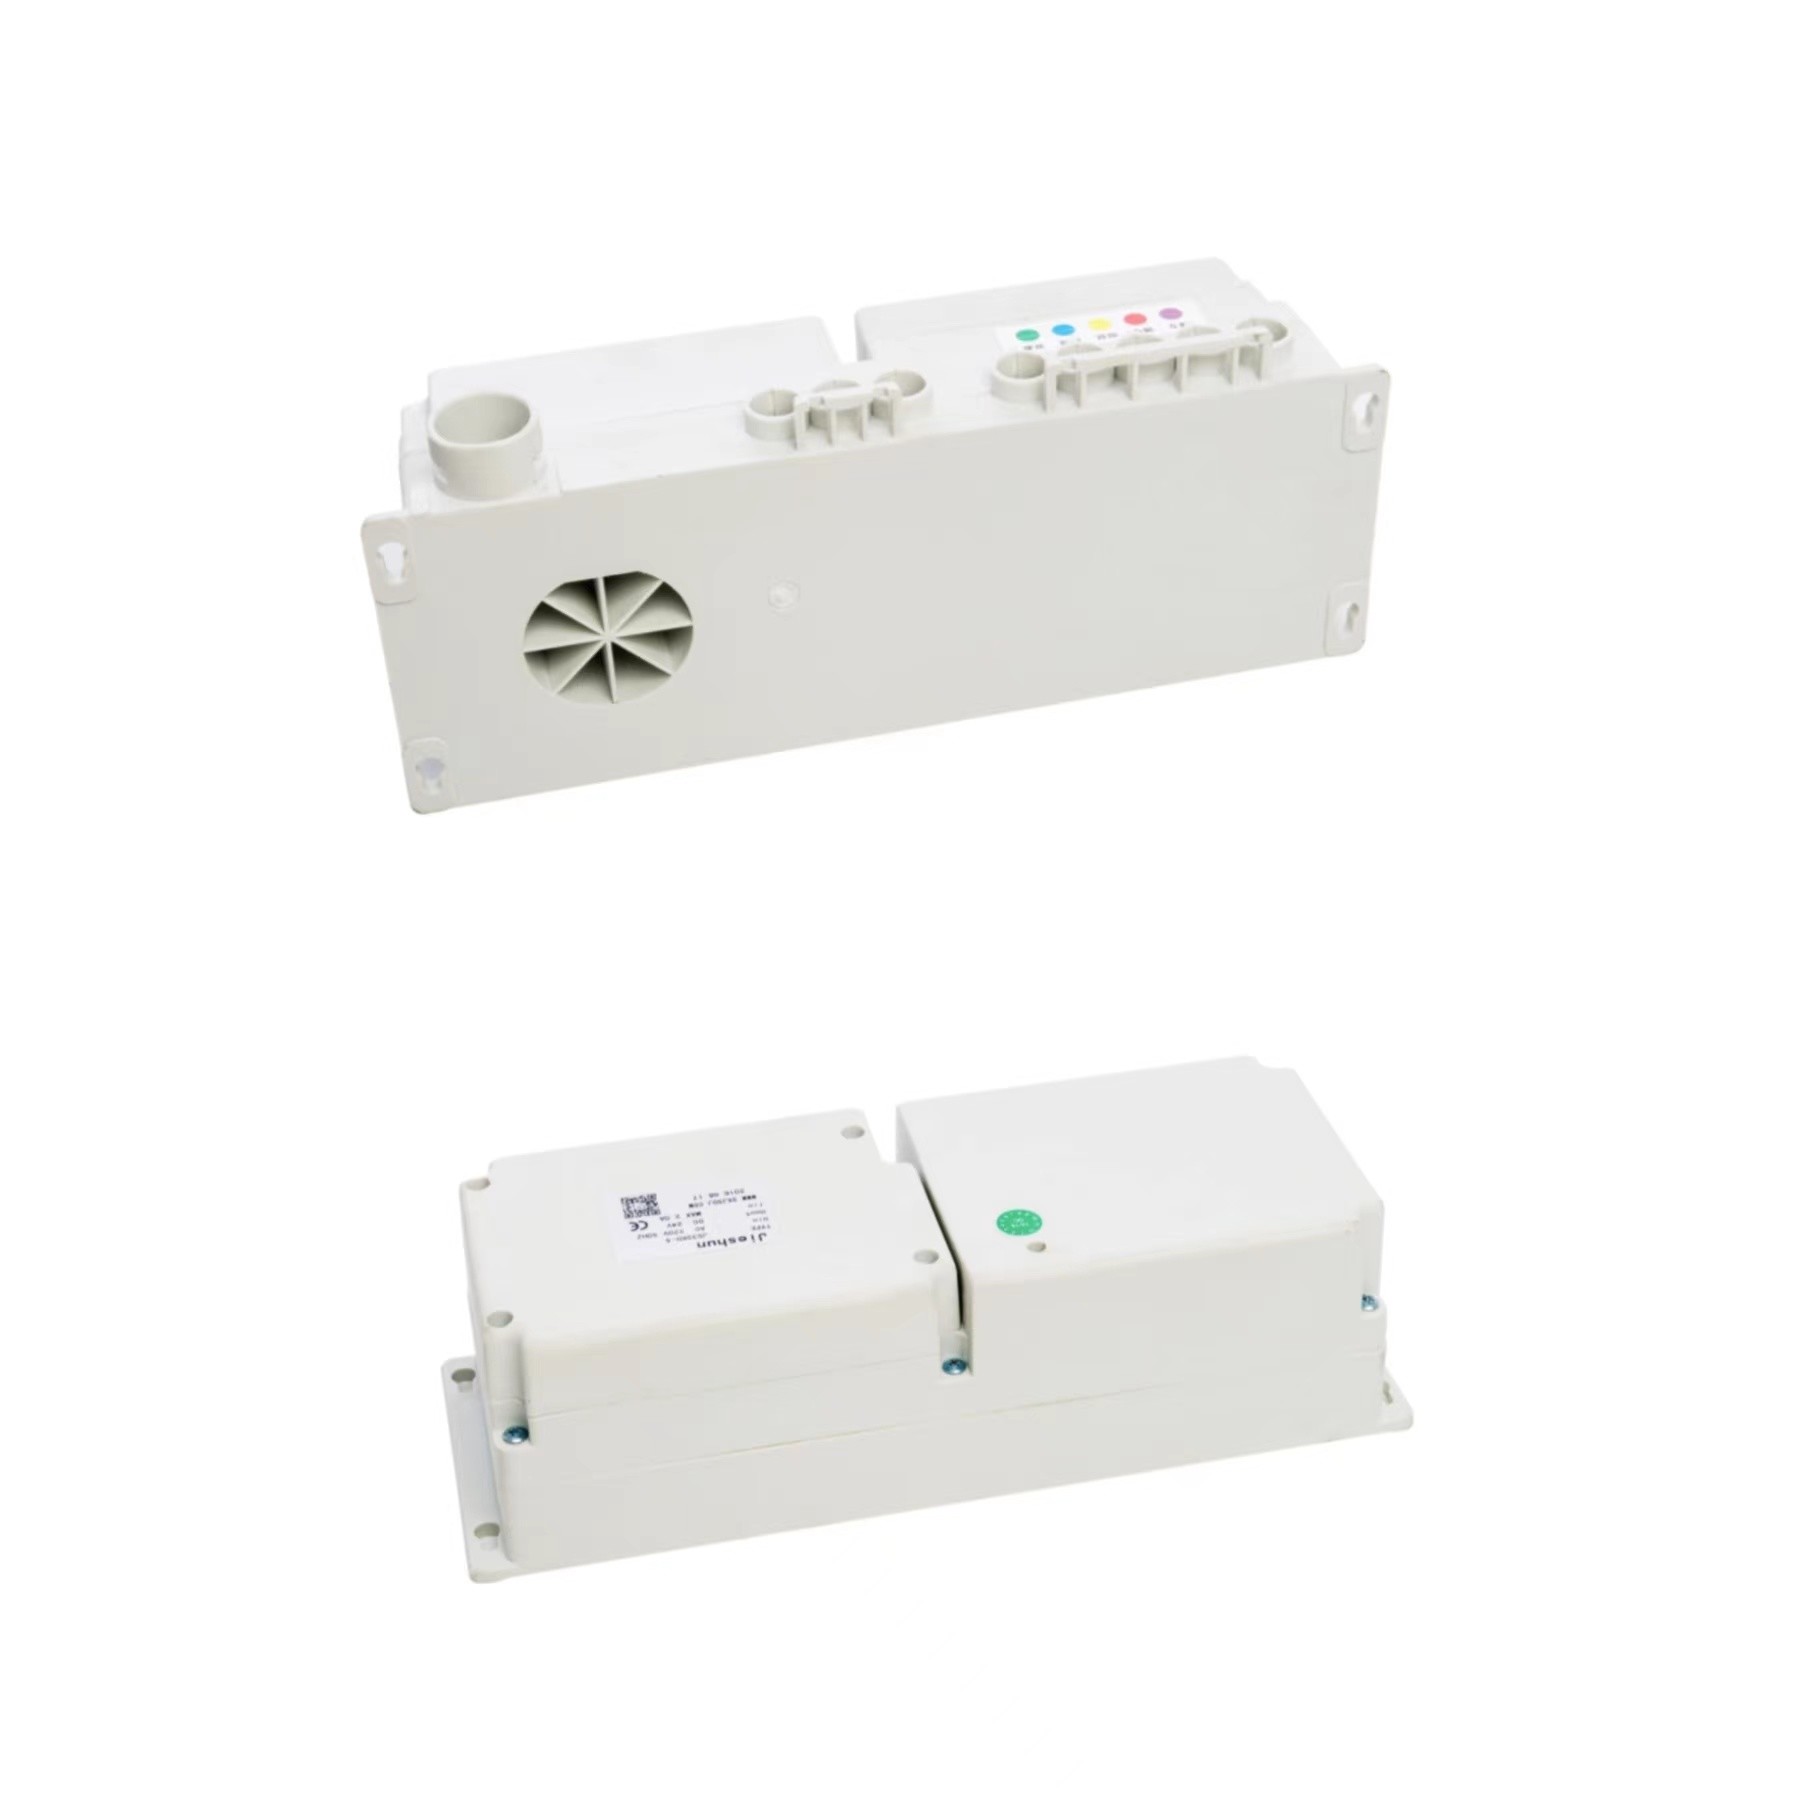  Electric Usage Hospital Bed Control Box White Multifunction Manufactures